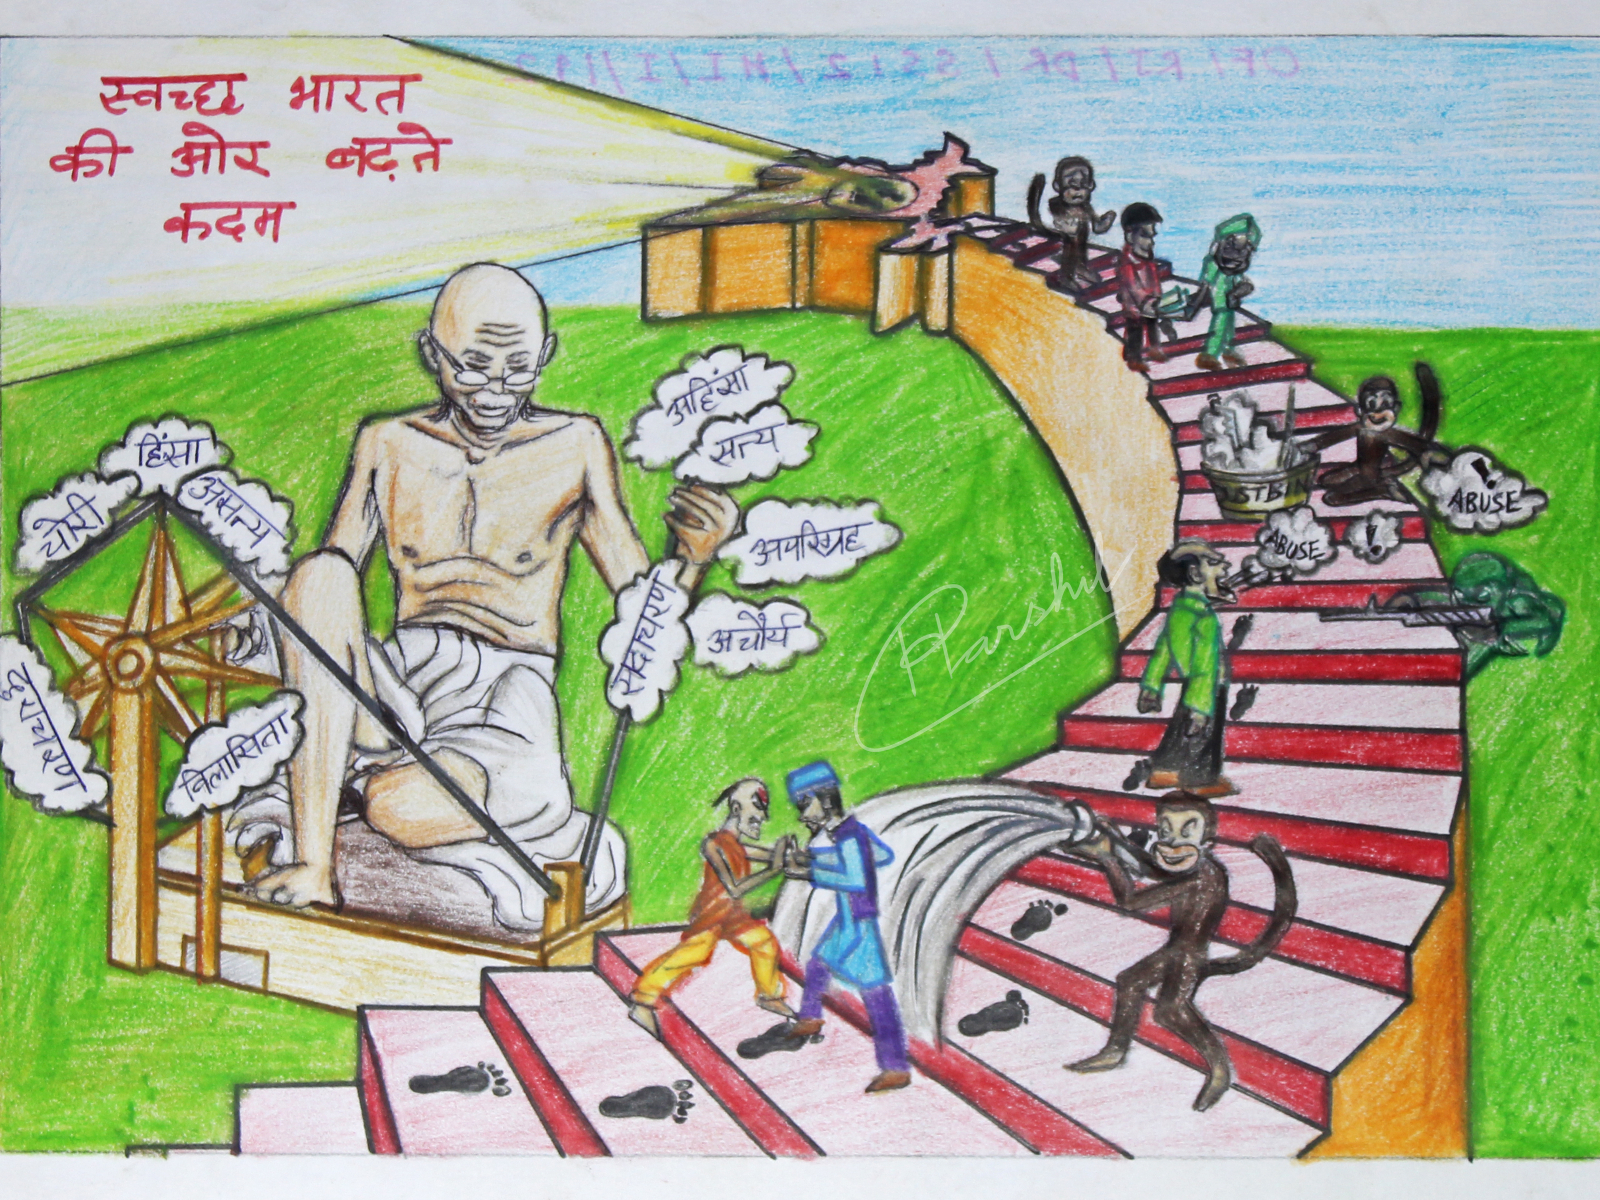 Incredible Compilation: Over 999 Swachh Bharat Drawing Competition Images -  Stunning Assortment of Full 4K Swachh Bharat Drawing Competition Images